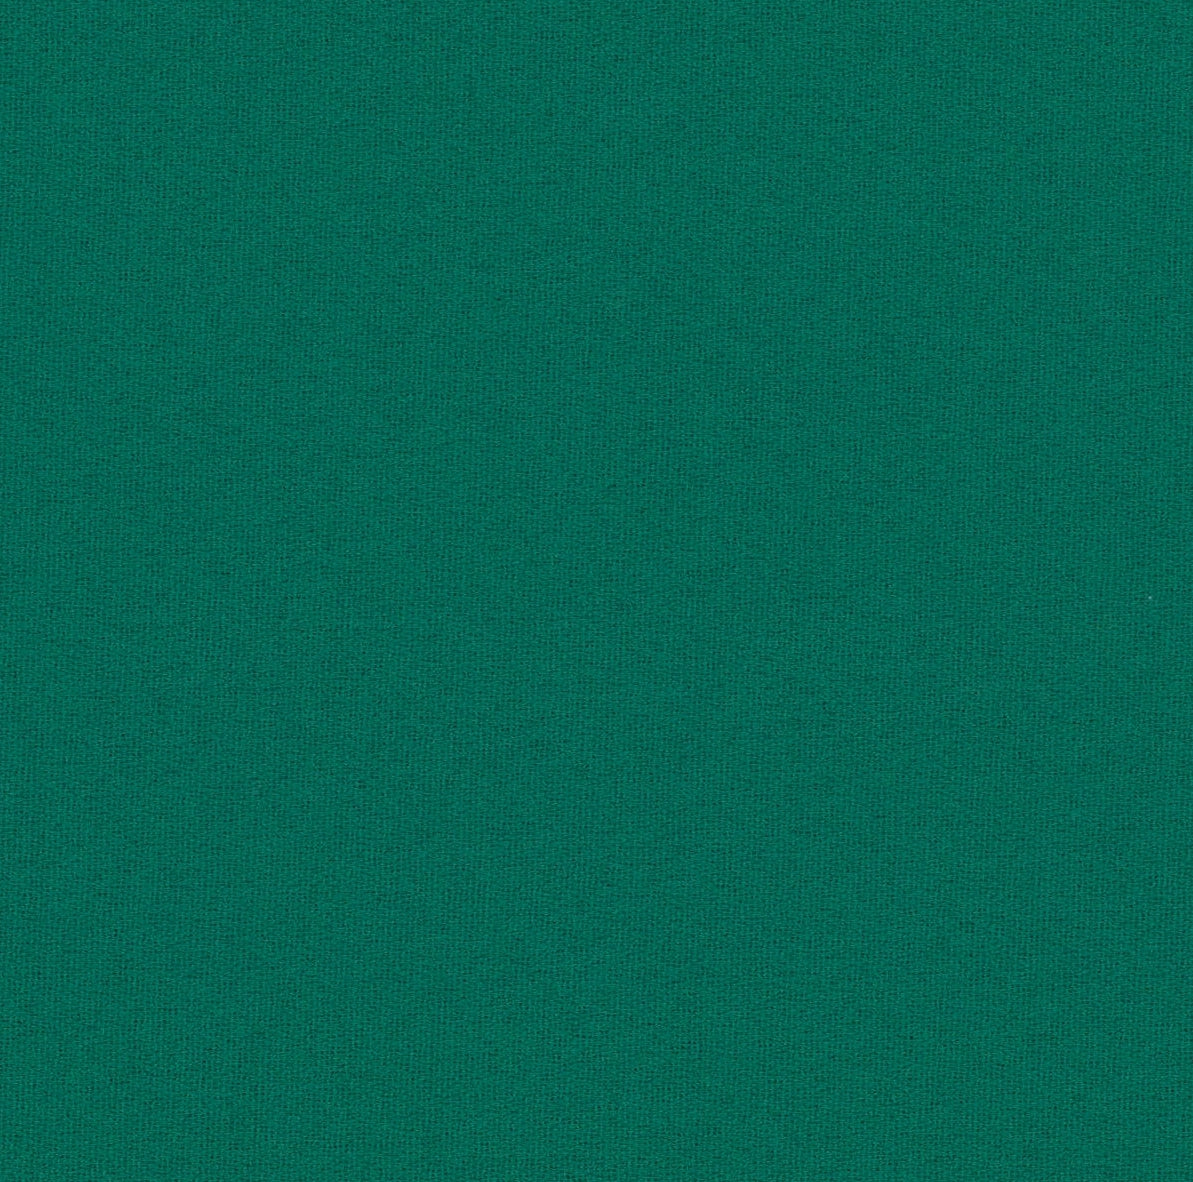 35001-04 Dark Spring Onion Crepe Plain Dyed Blend 315g/yd 54" crepe green plain dyed polyester woven Solid Color - knit fabric - woven fabric - fabric company - fabric wholesale - fabric b2b - fabric factory - high quality fabric - hong kong fabric - fabric hk - acetate fabric - cotton fabric - linen fabric - metallic fabric - nylon fabric - polyester fabric - spandex fabric - chun wing hing - cwh hk - fabric worldwide ship - 針織布 - 梳織布 - 布料公司- 布料批發 - 香港布料 - 秦榮興